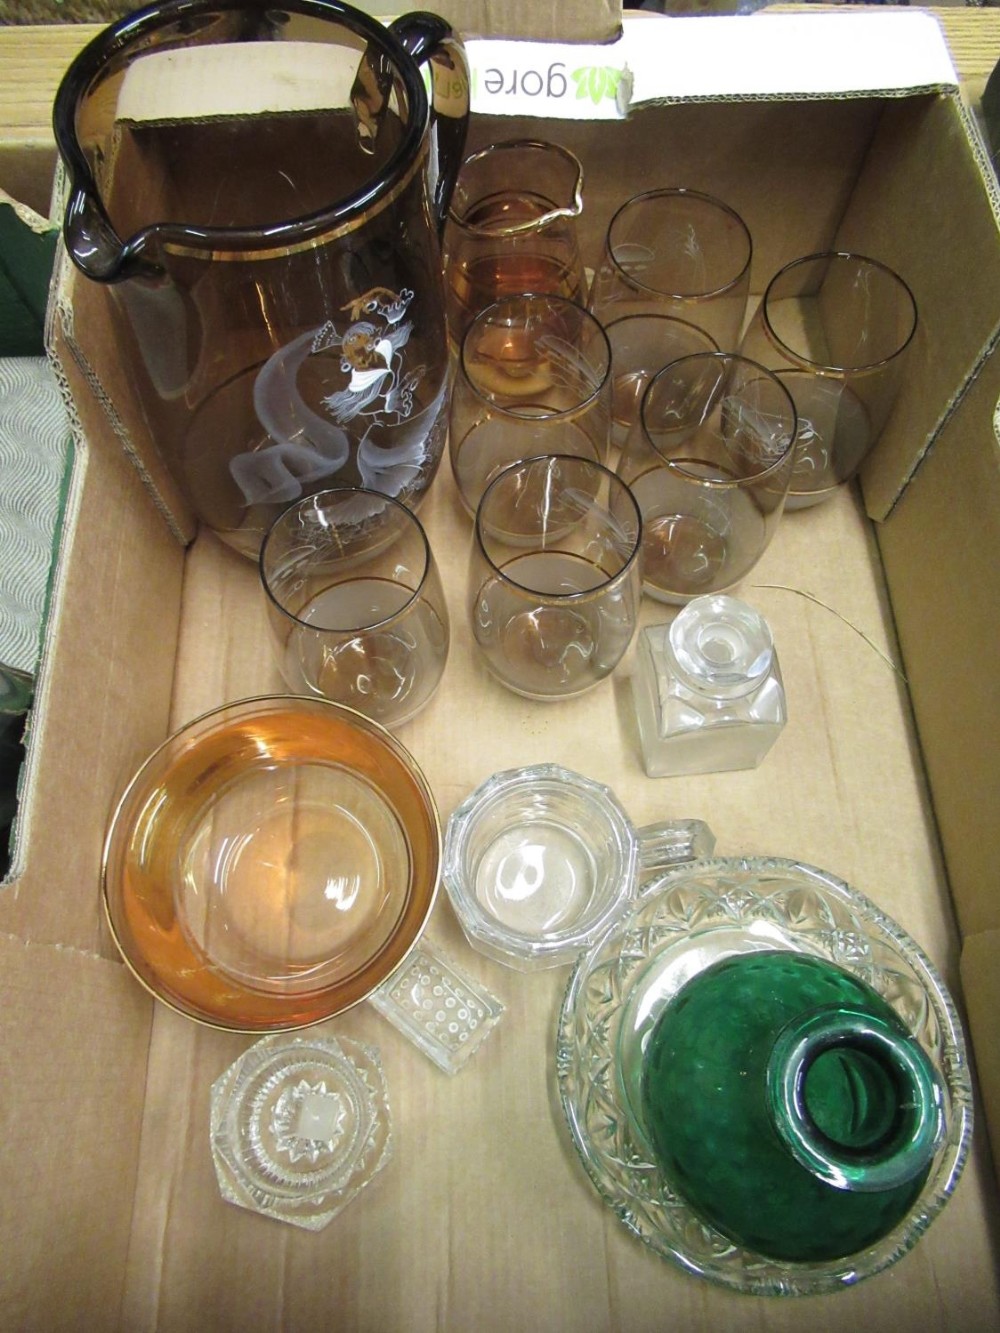 Box of various glassware including water jug with painted flamenco design and a set of six